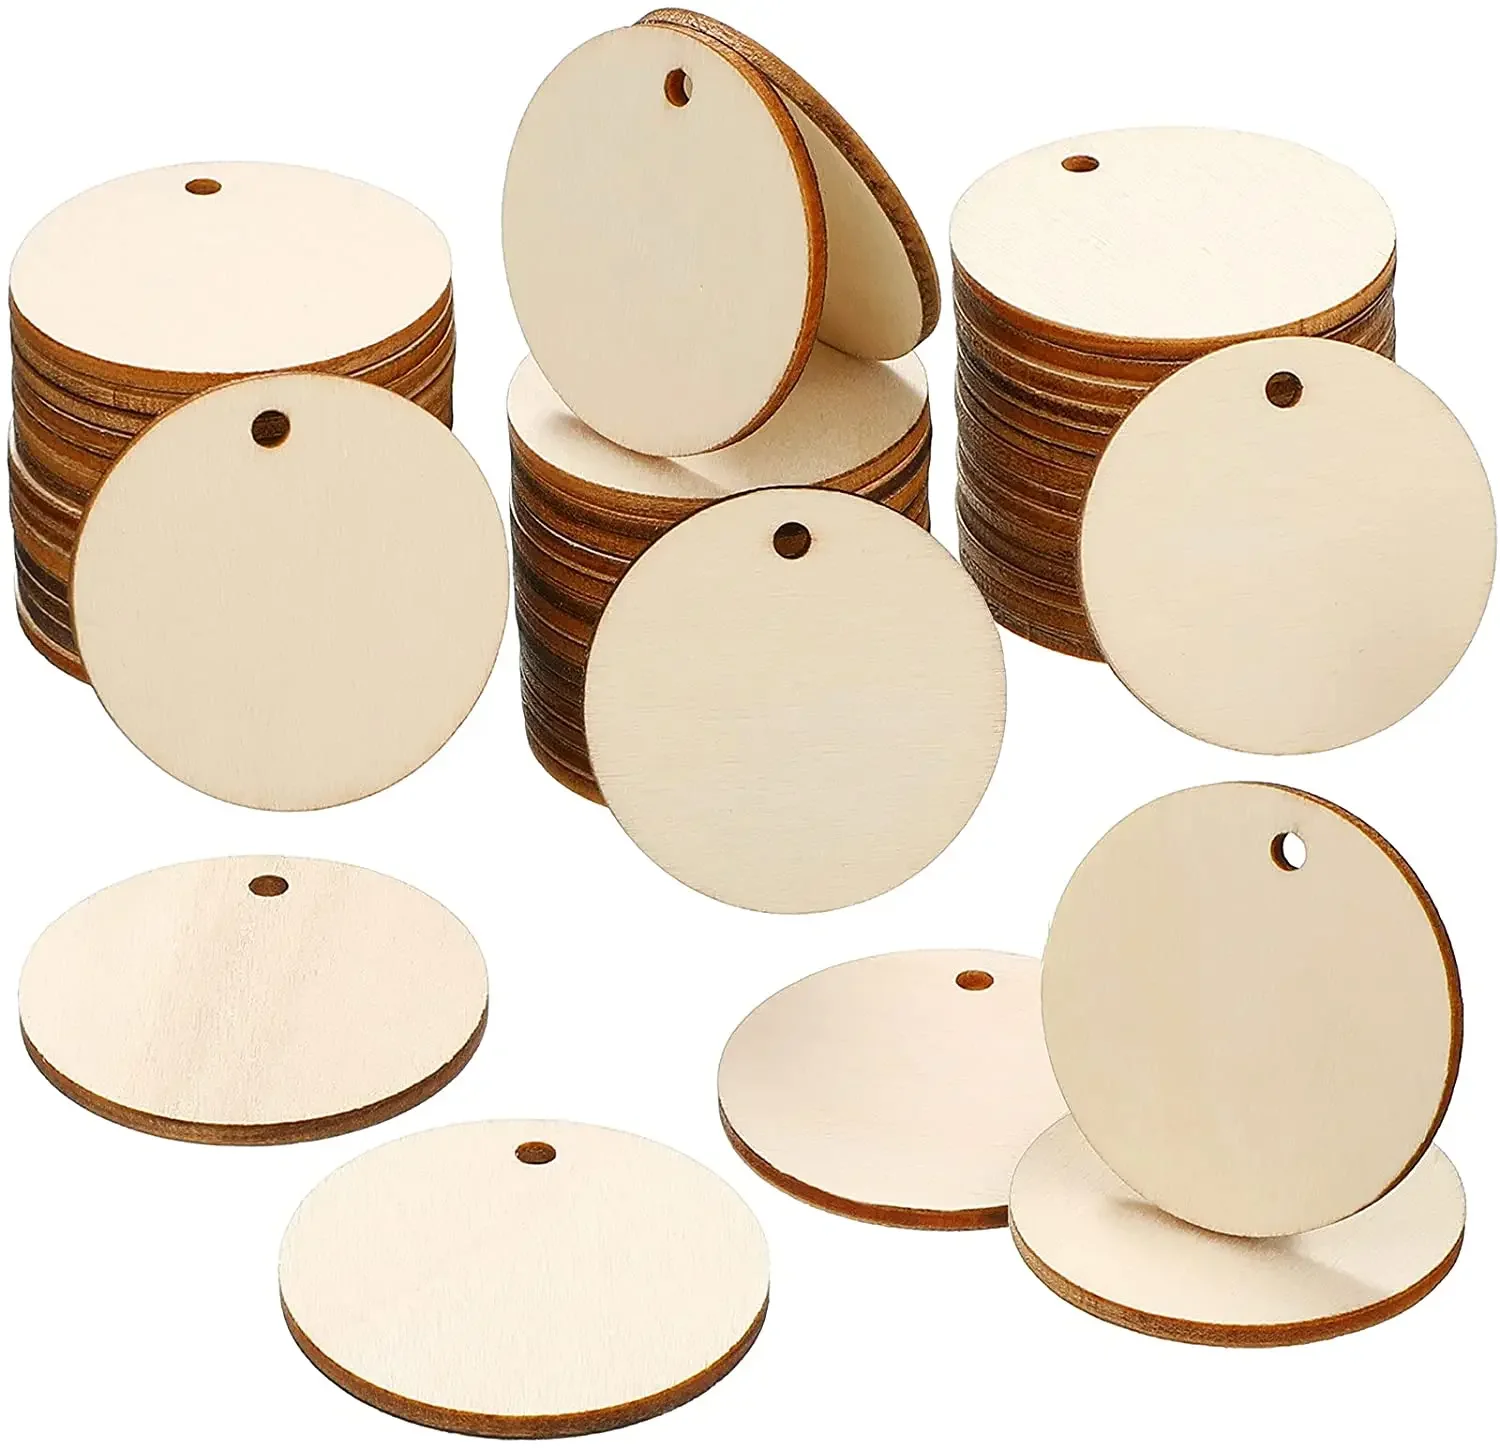 20/30/40/50mm Natural Unfinished Round Wood Slices With Hole Discs Blank Signs Craft For Wedding Party Gift Christmas Home Decor